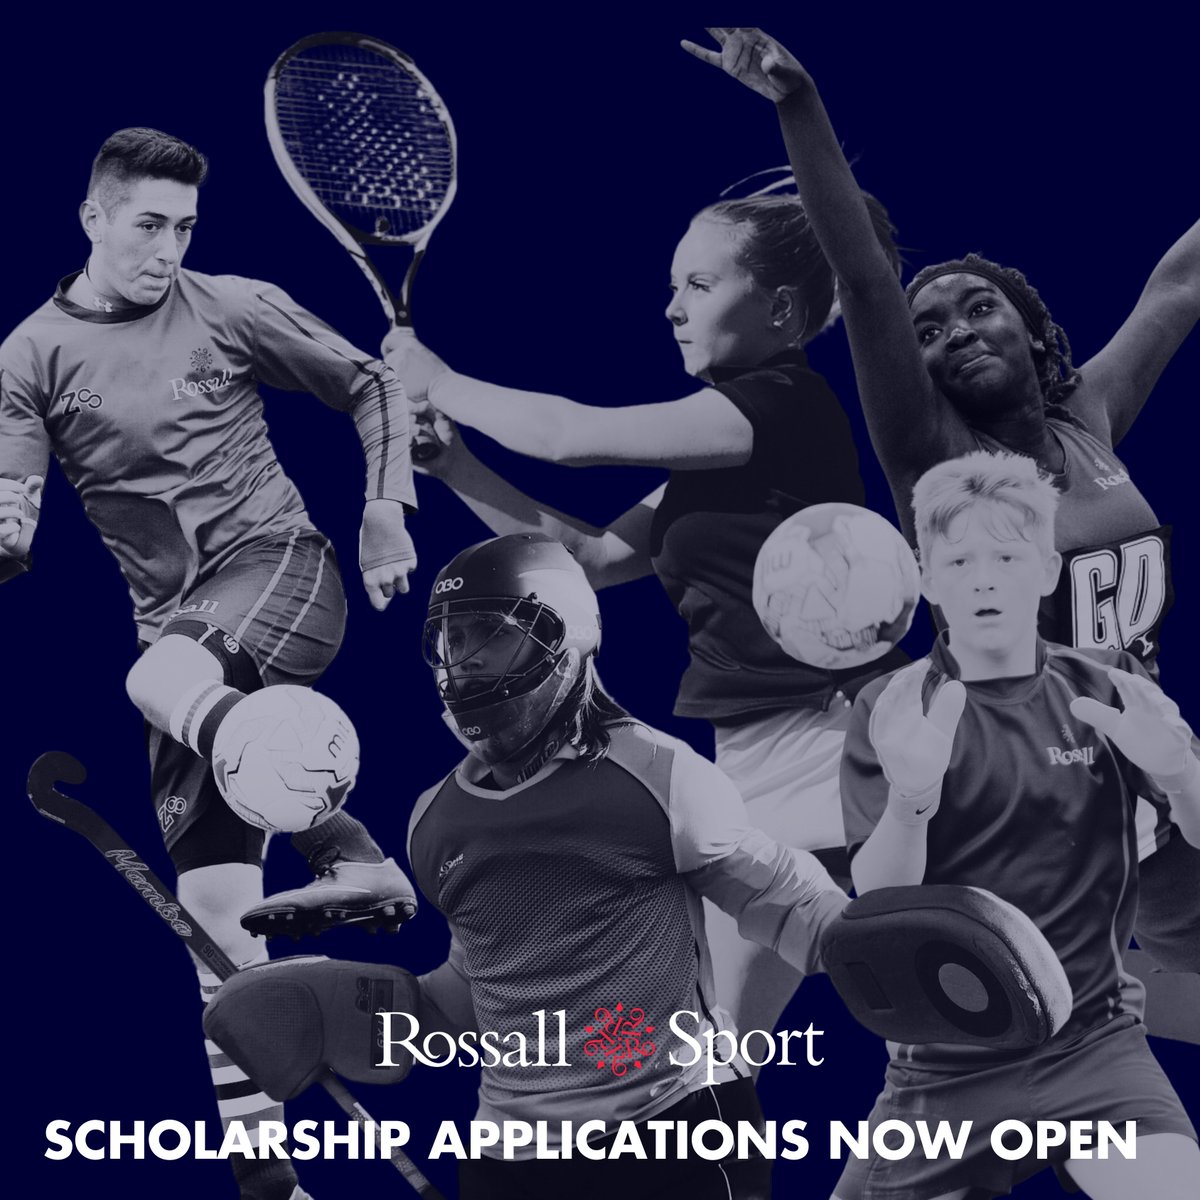 Rossall are delighted to be accepting Scholarship applications for entry into Yr 7, 9 & 12 in Sept ‘24, for UK students who excel in sports, including: 🎾All Rounder Sports Scholarships ⚽Signature Football Scholarships ⛳Signature Golf Scholarships bit.ly/3PJs4bd